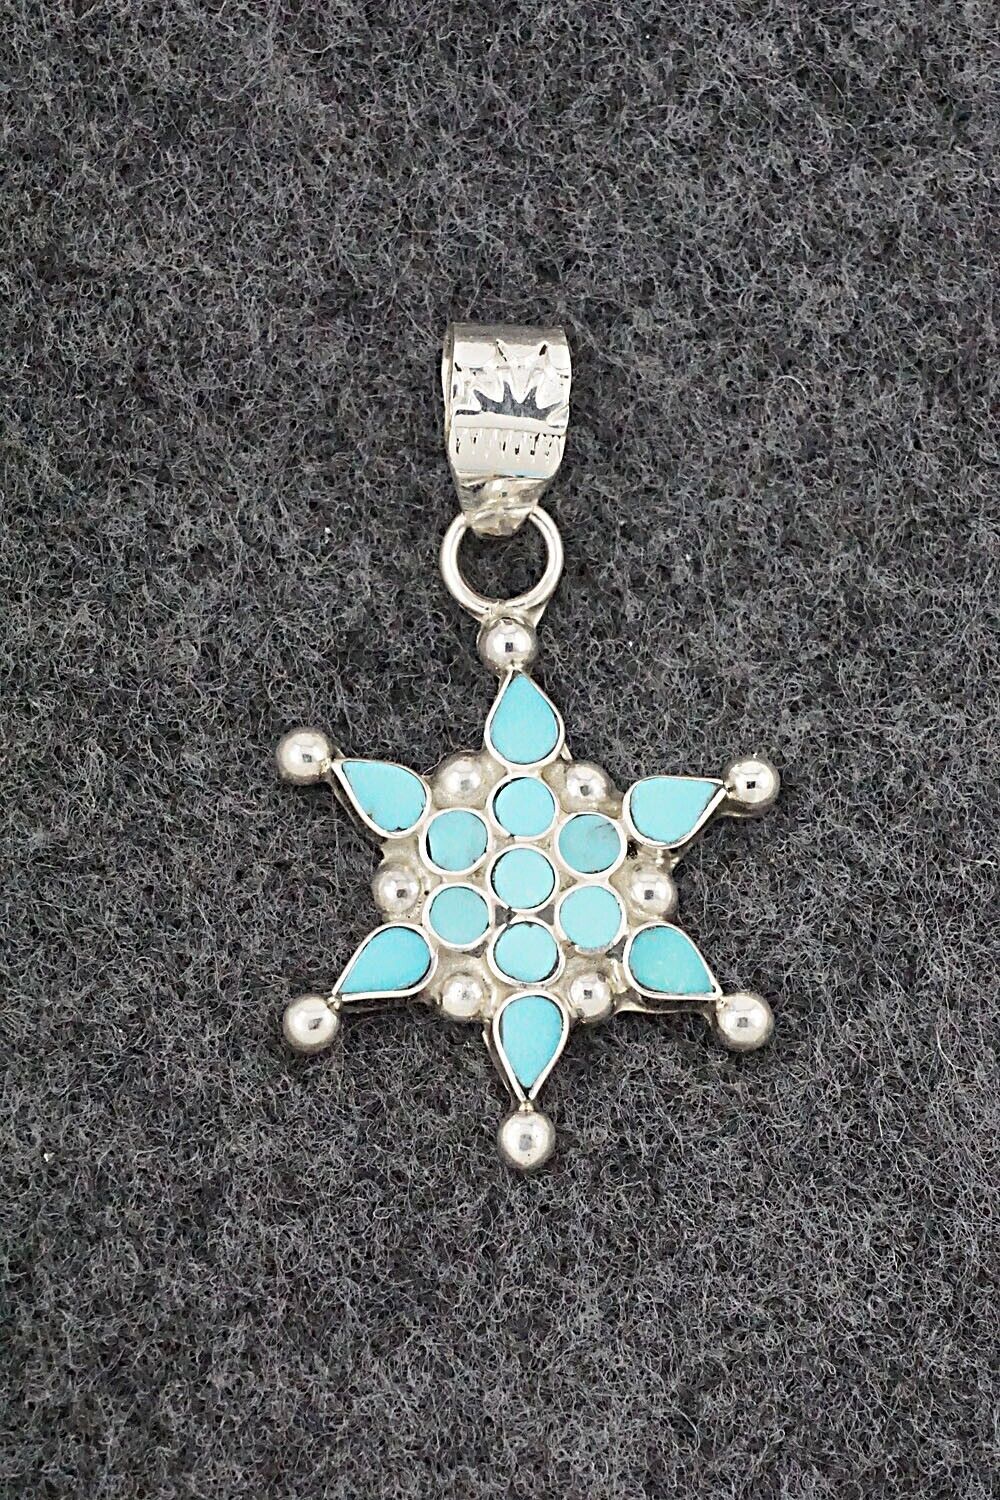 Turquoise & Sterling Silver Pendant - Michelle Peina